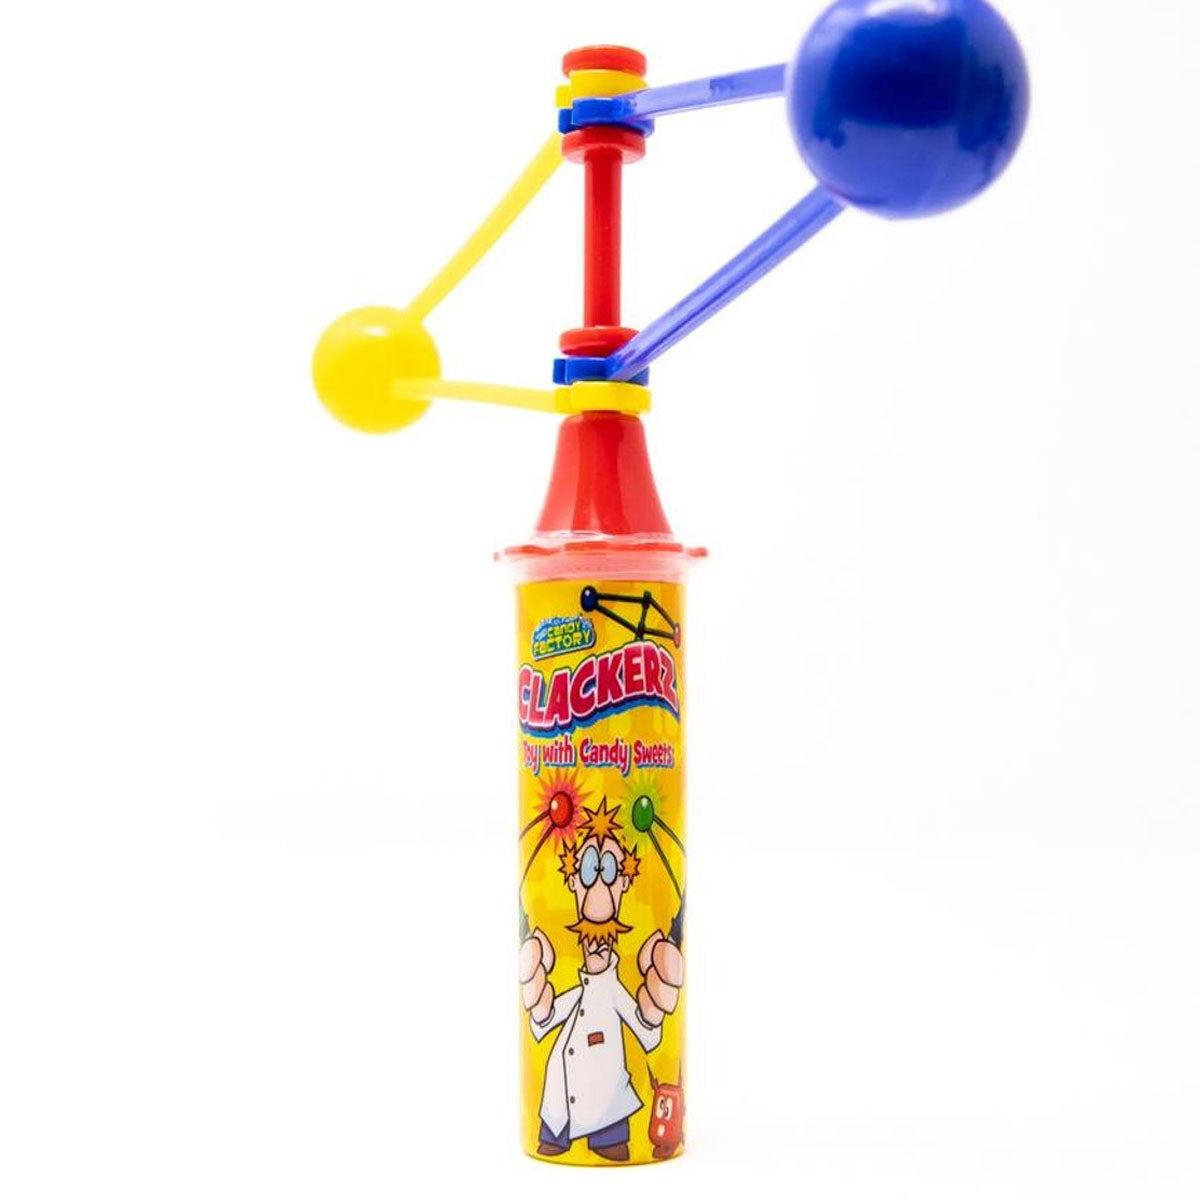 A Crazy Candy Factory - Clackerz Toy & Sweets - 16g with a ball in it.